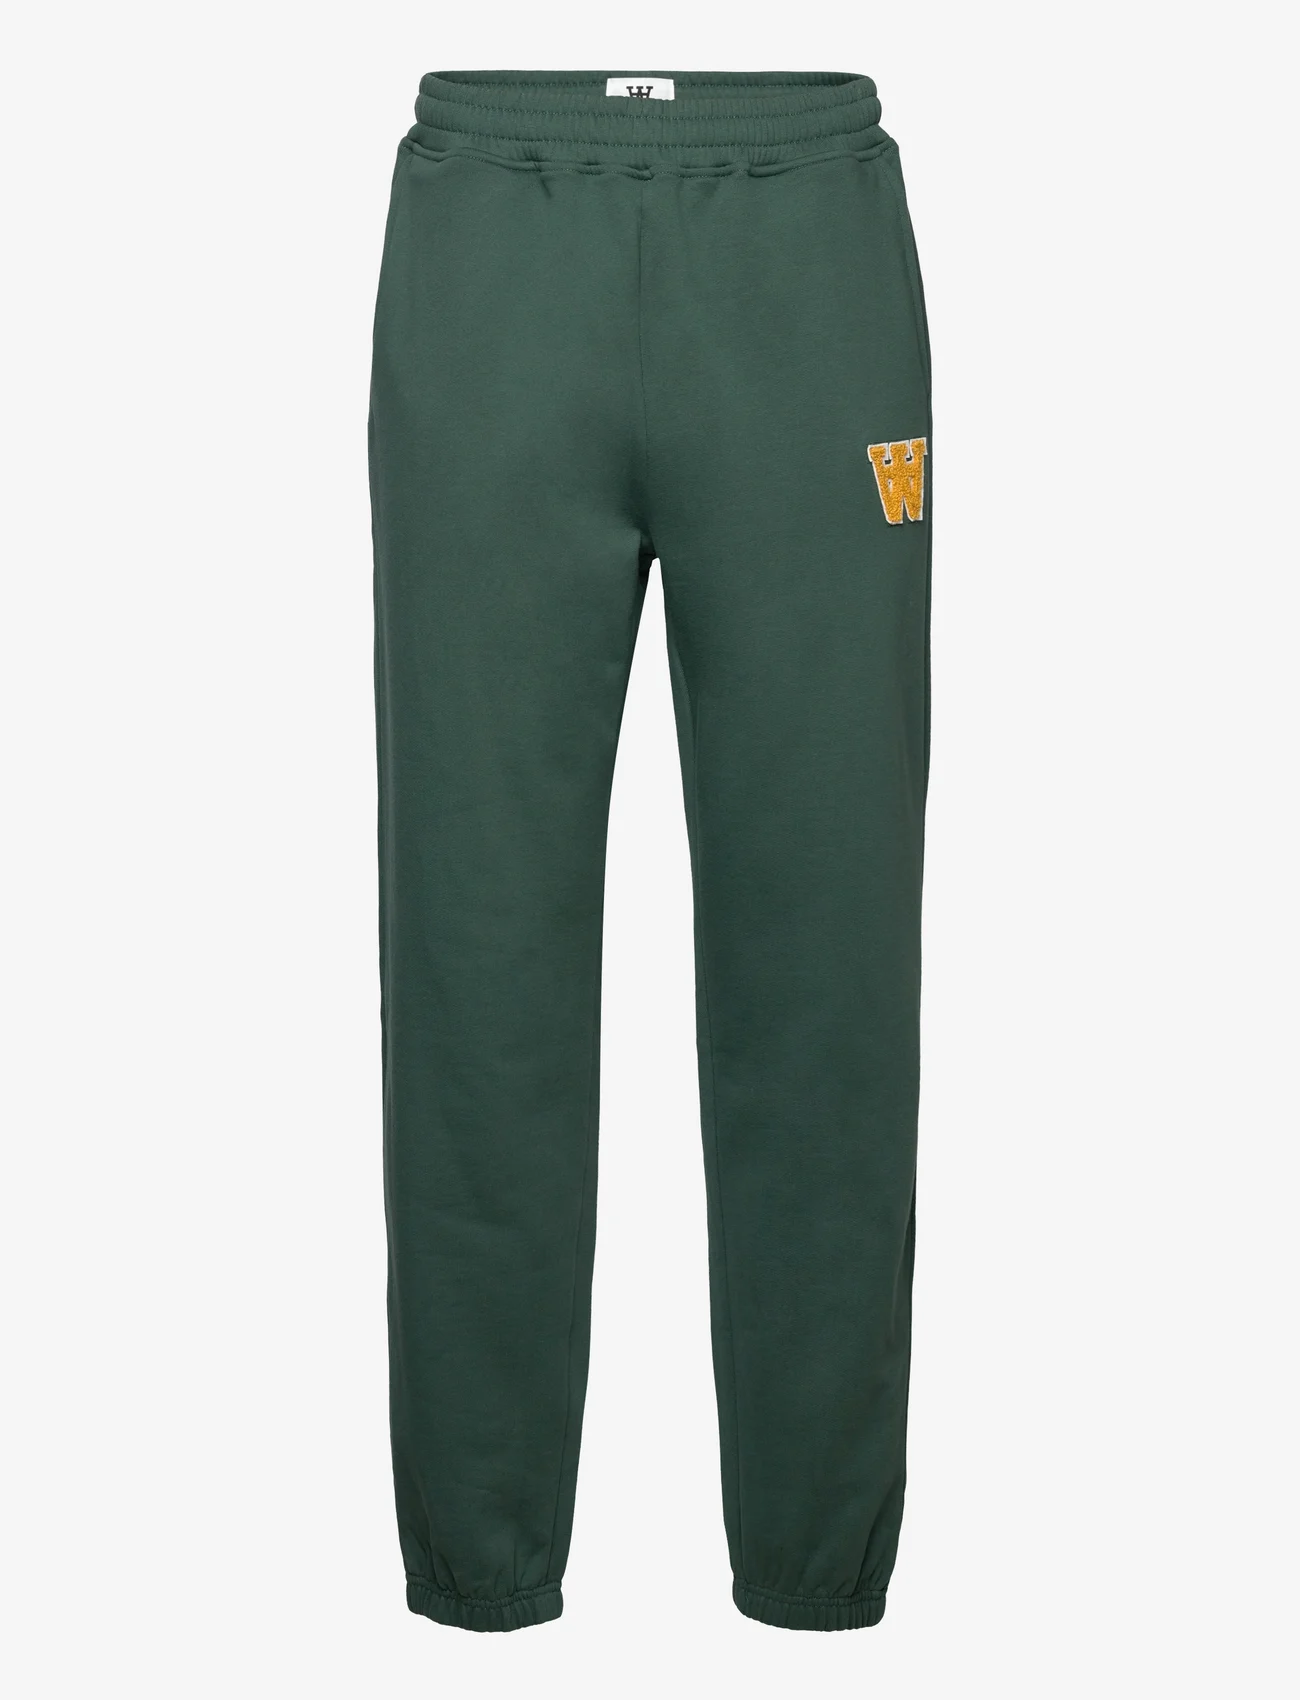 Double A by Wood Wood - Cal joggers - sportinės kelnės - forest green - 0